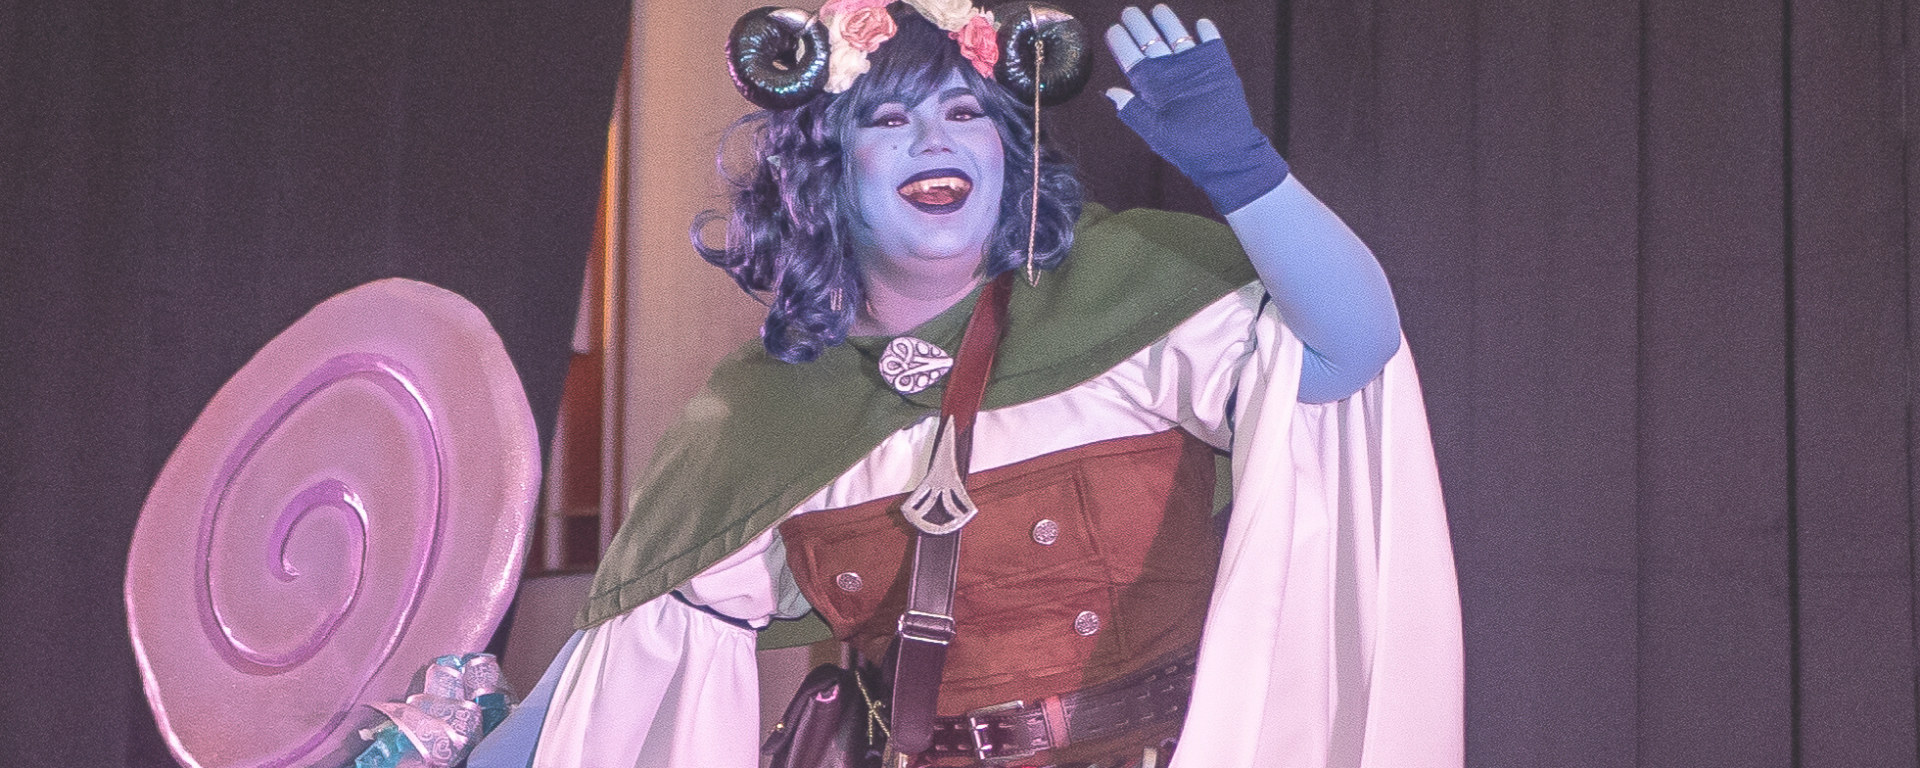 cosplayer at Anime Dallas 2019